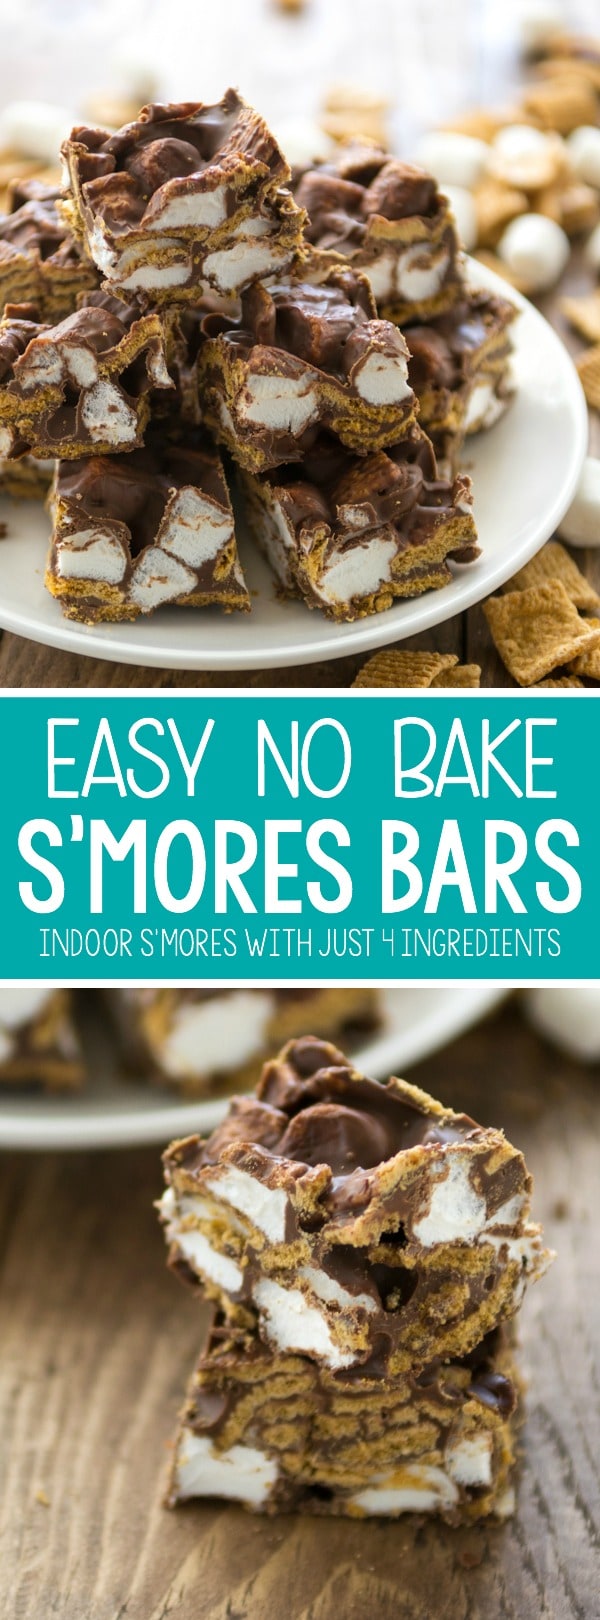 EASY No Bake S'mores Bars - this easy indoor s'more recipe has just 4 ingredients and the kids can make it in minutes!